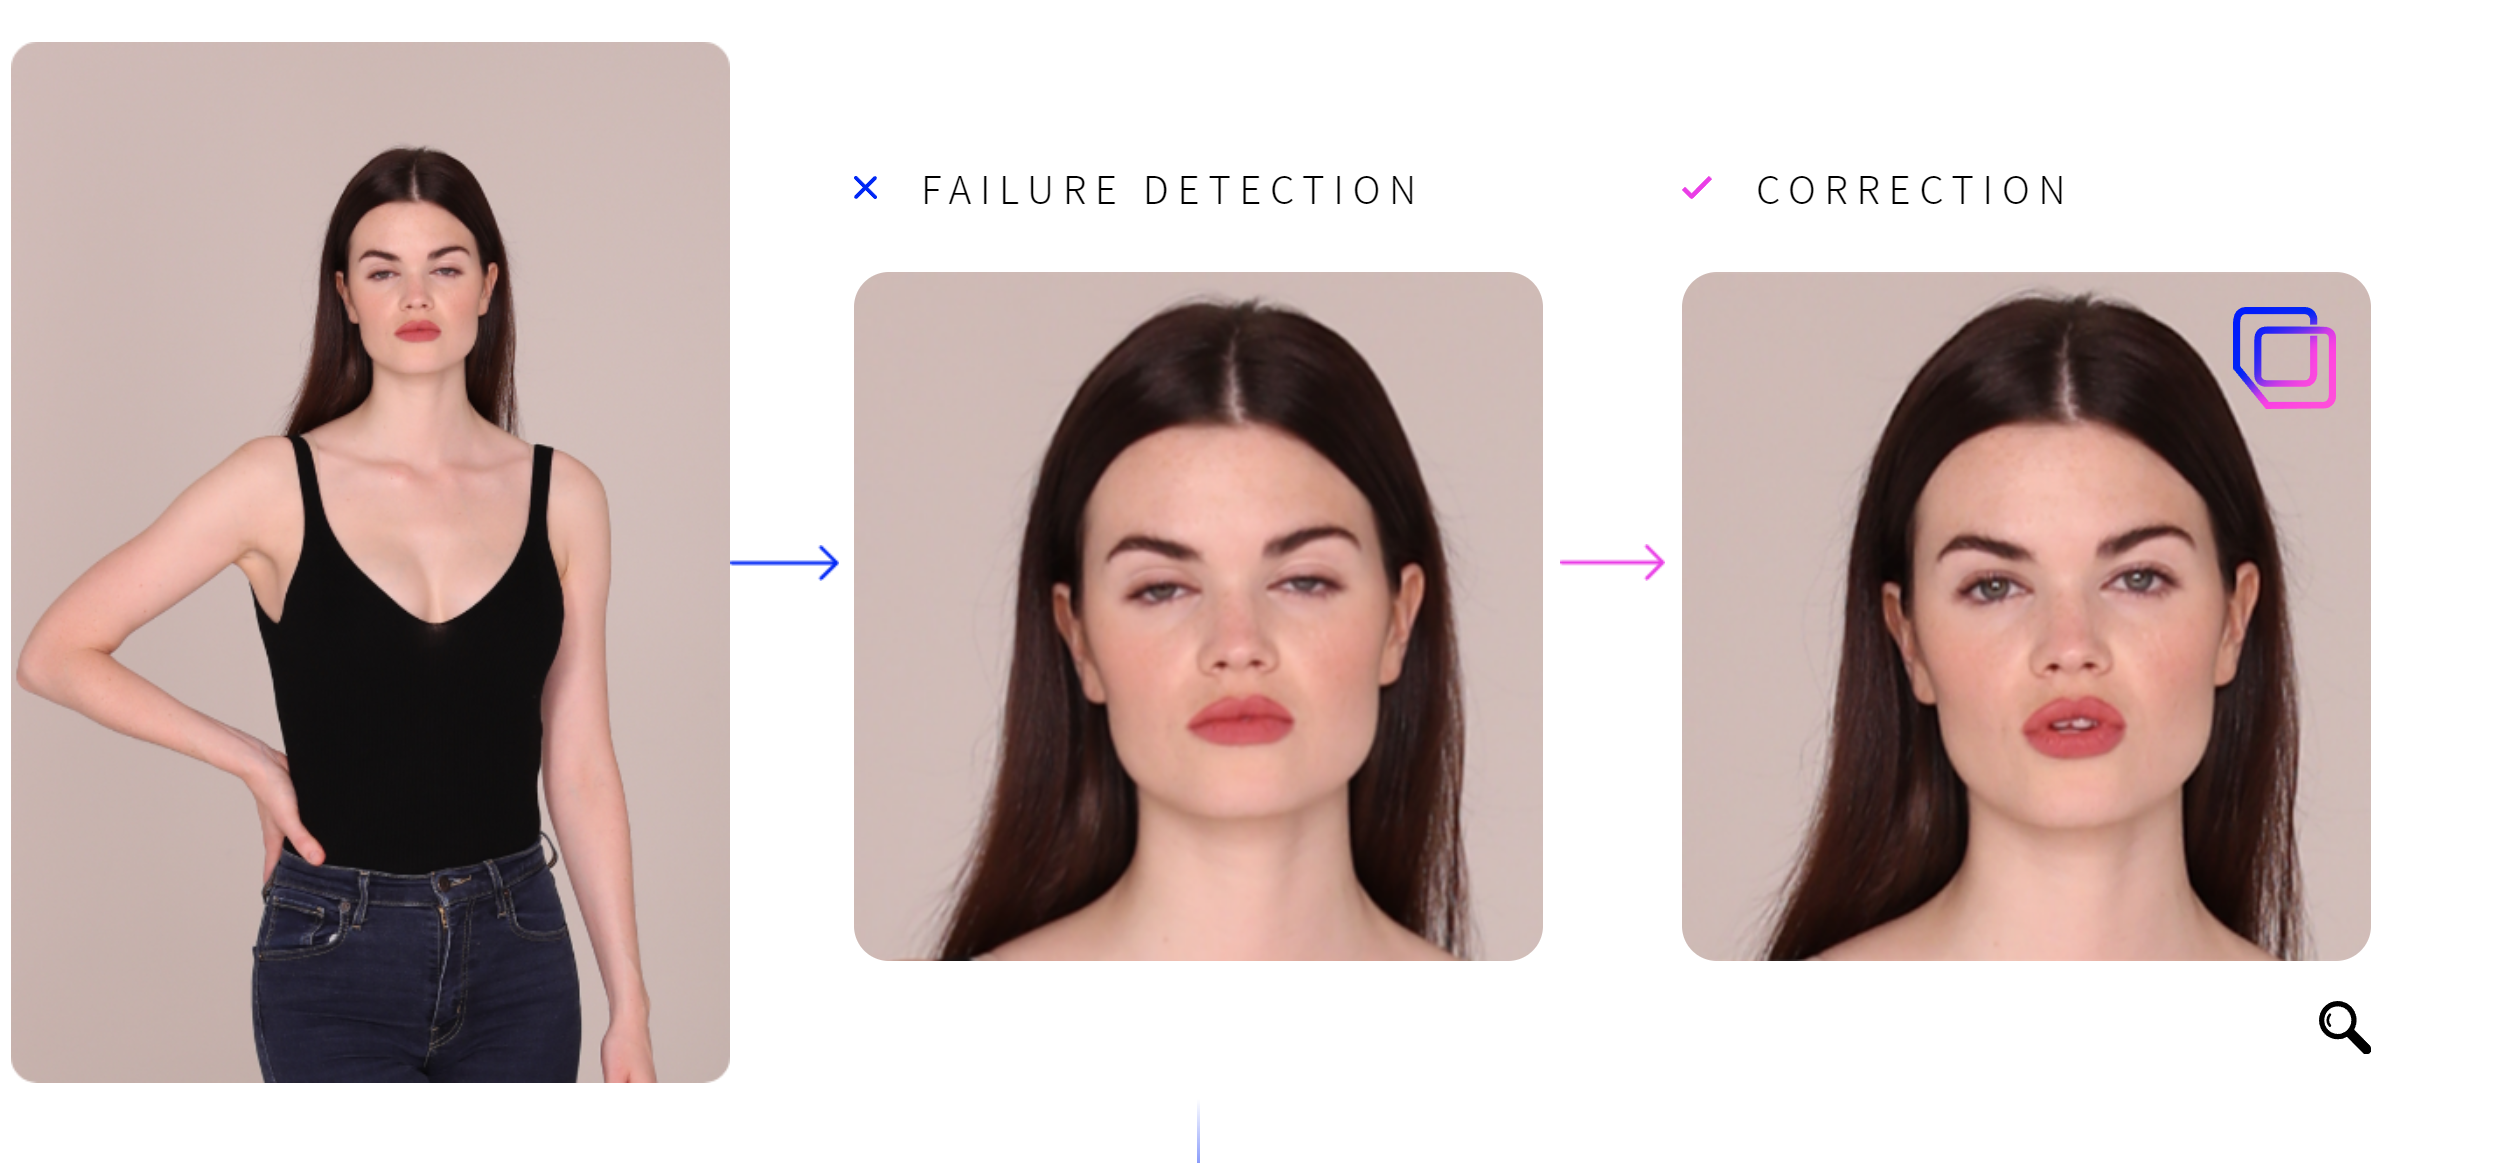 Instantly add emotion to faces with AI